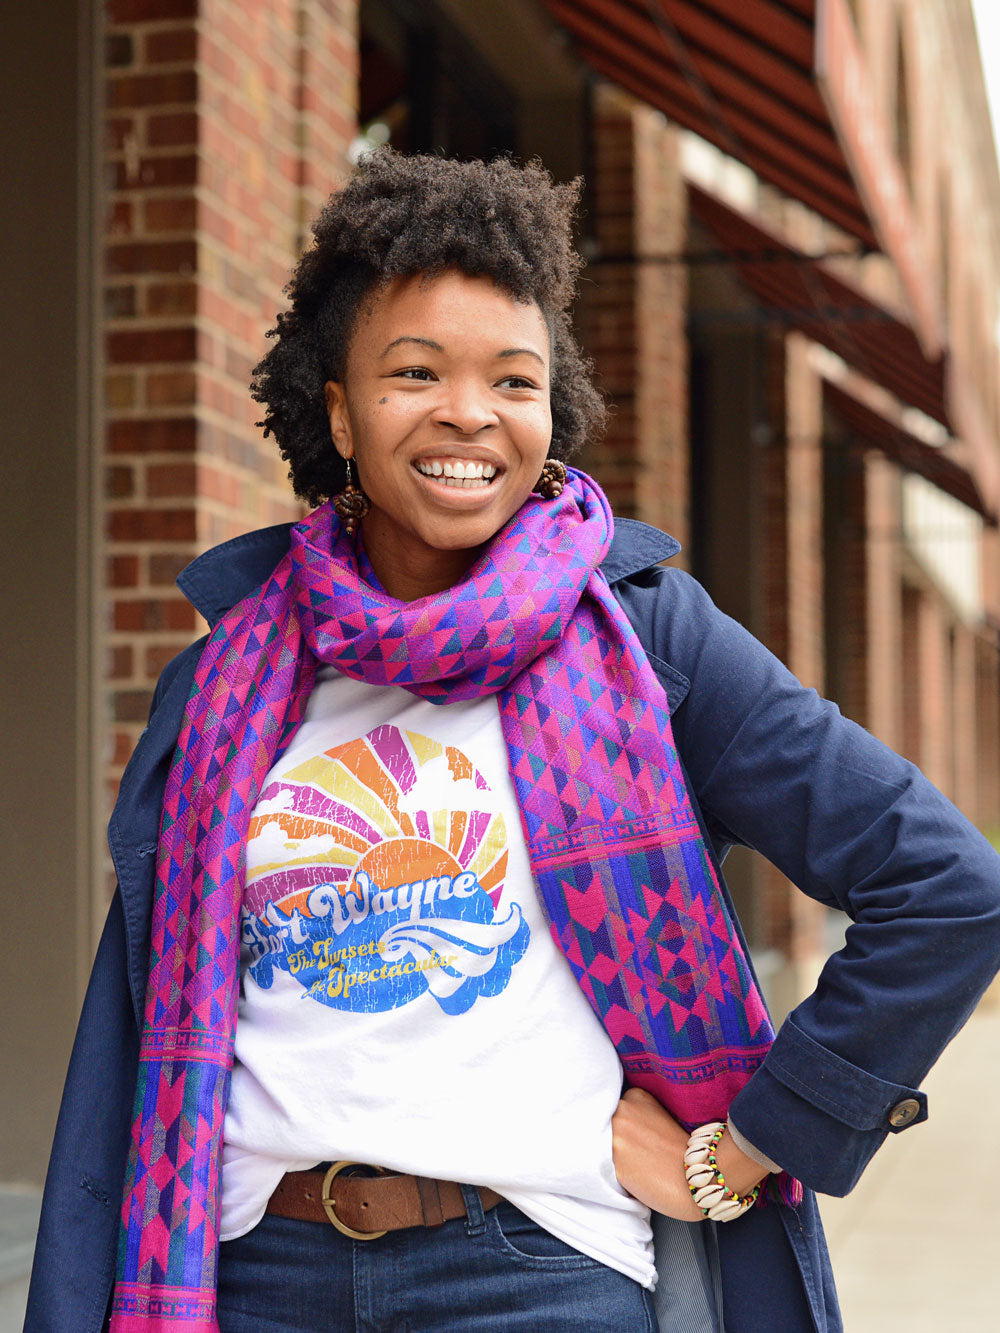 Fort Wayne the Sunsets are Spectacular baseball tee on model with purple scarf